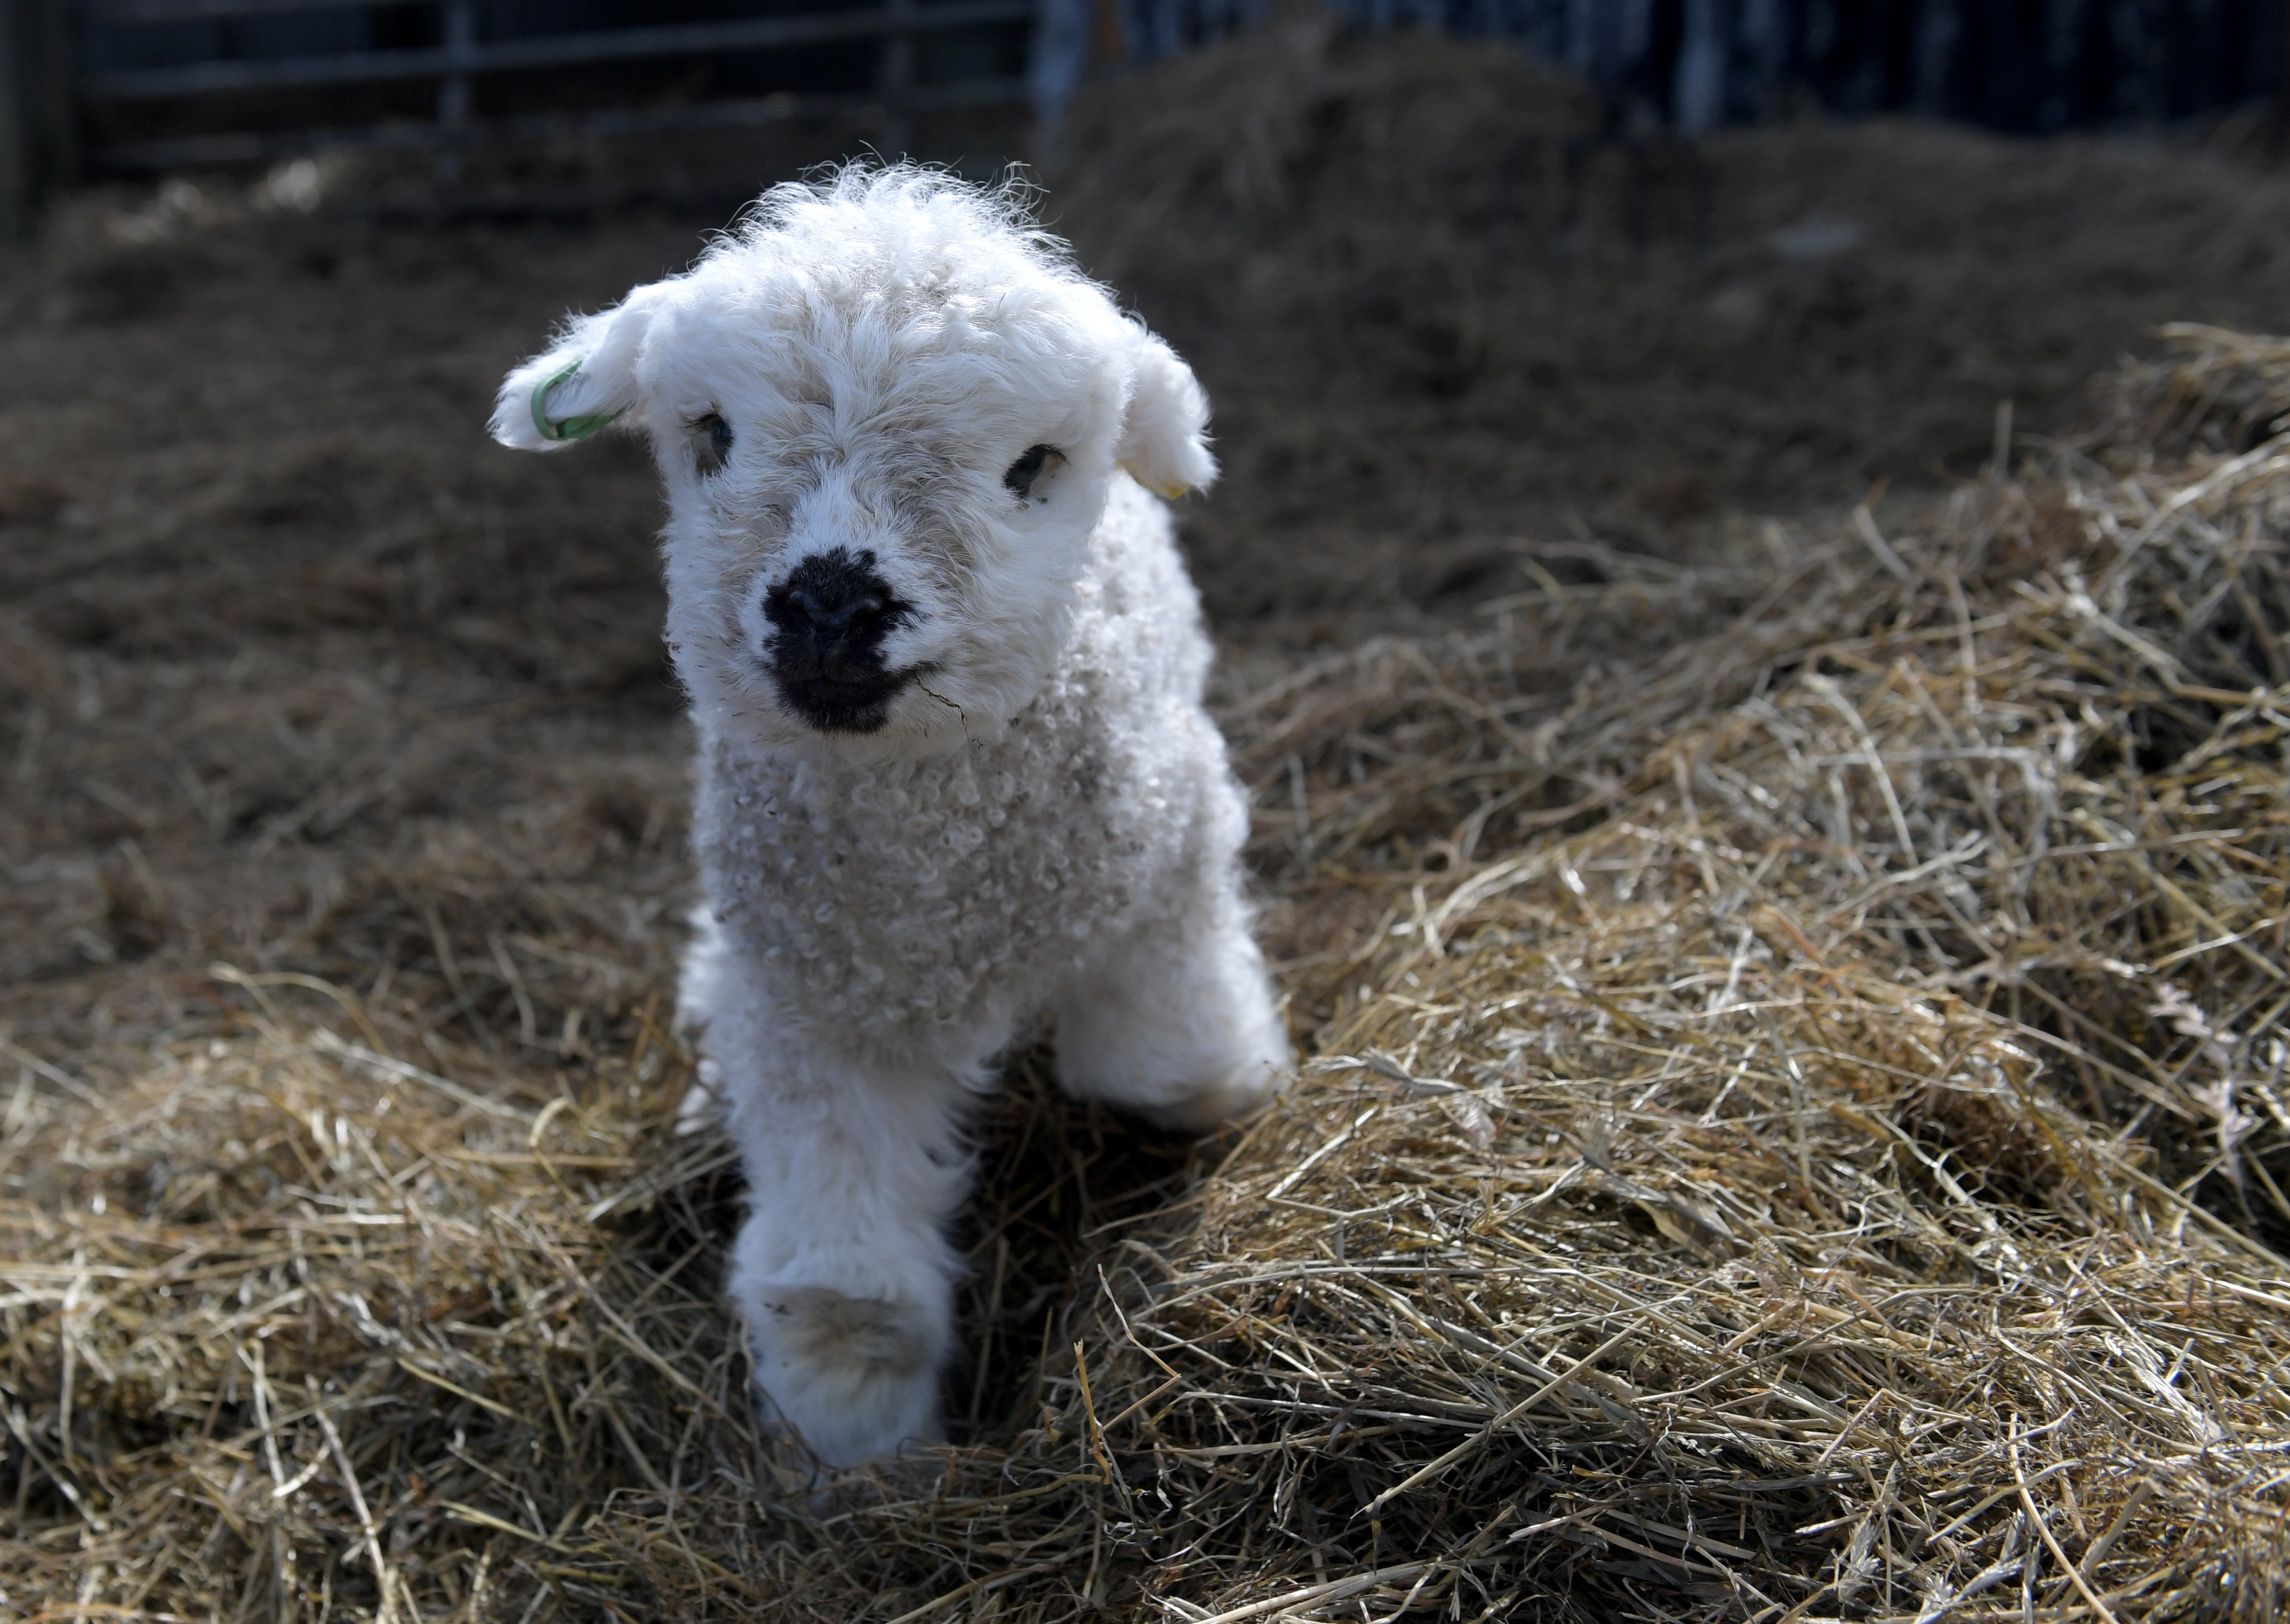 Doonies Farm have reopened for the season. Pictured is new lamb Daisy.